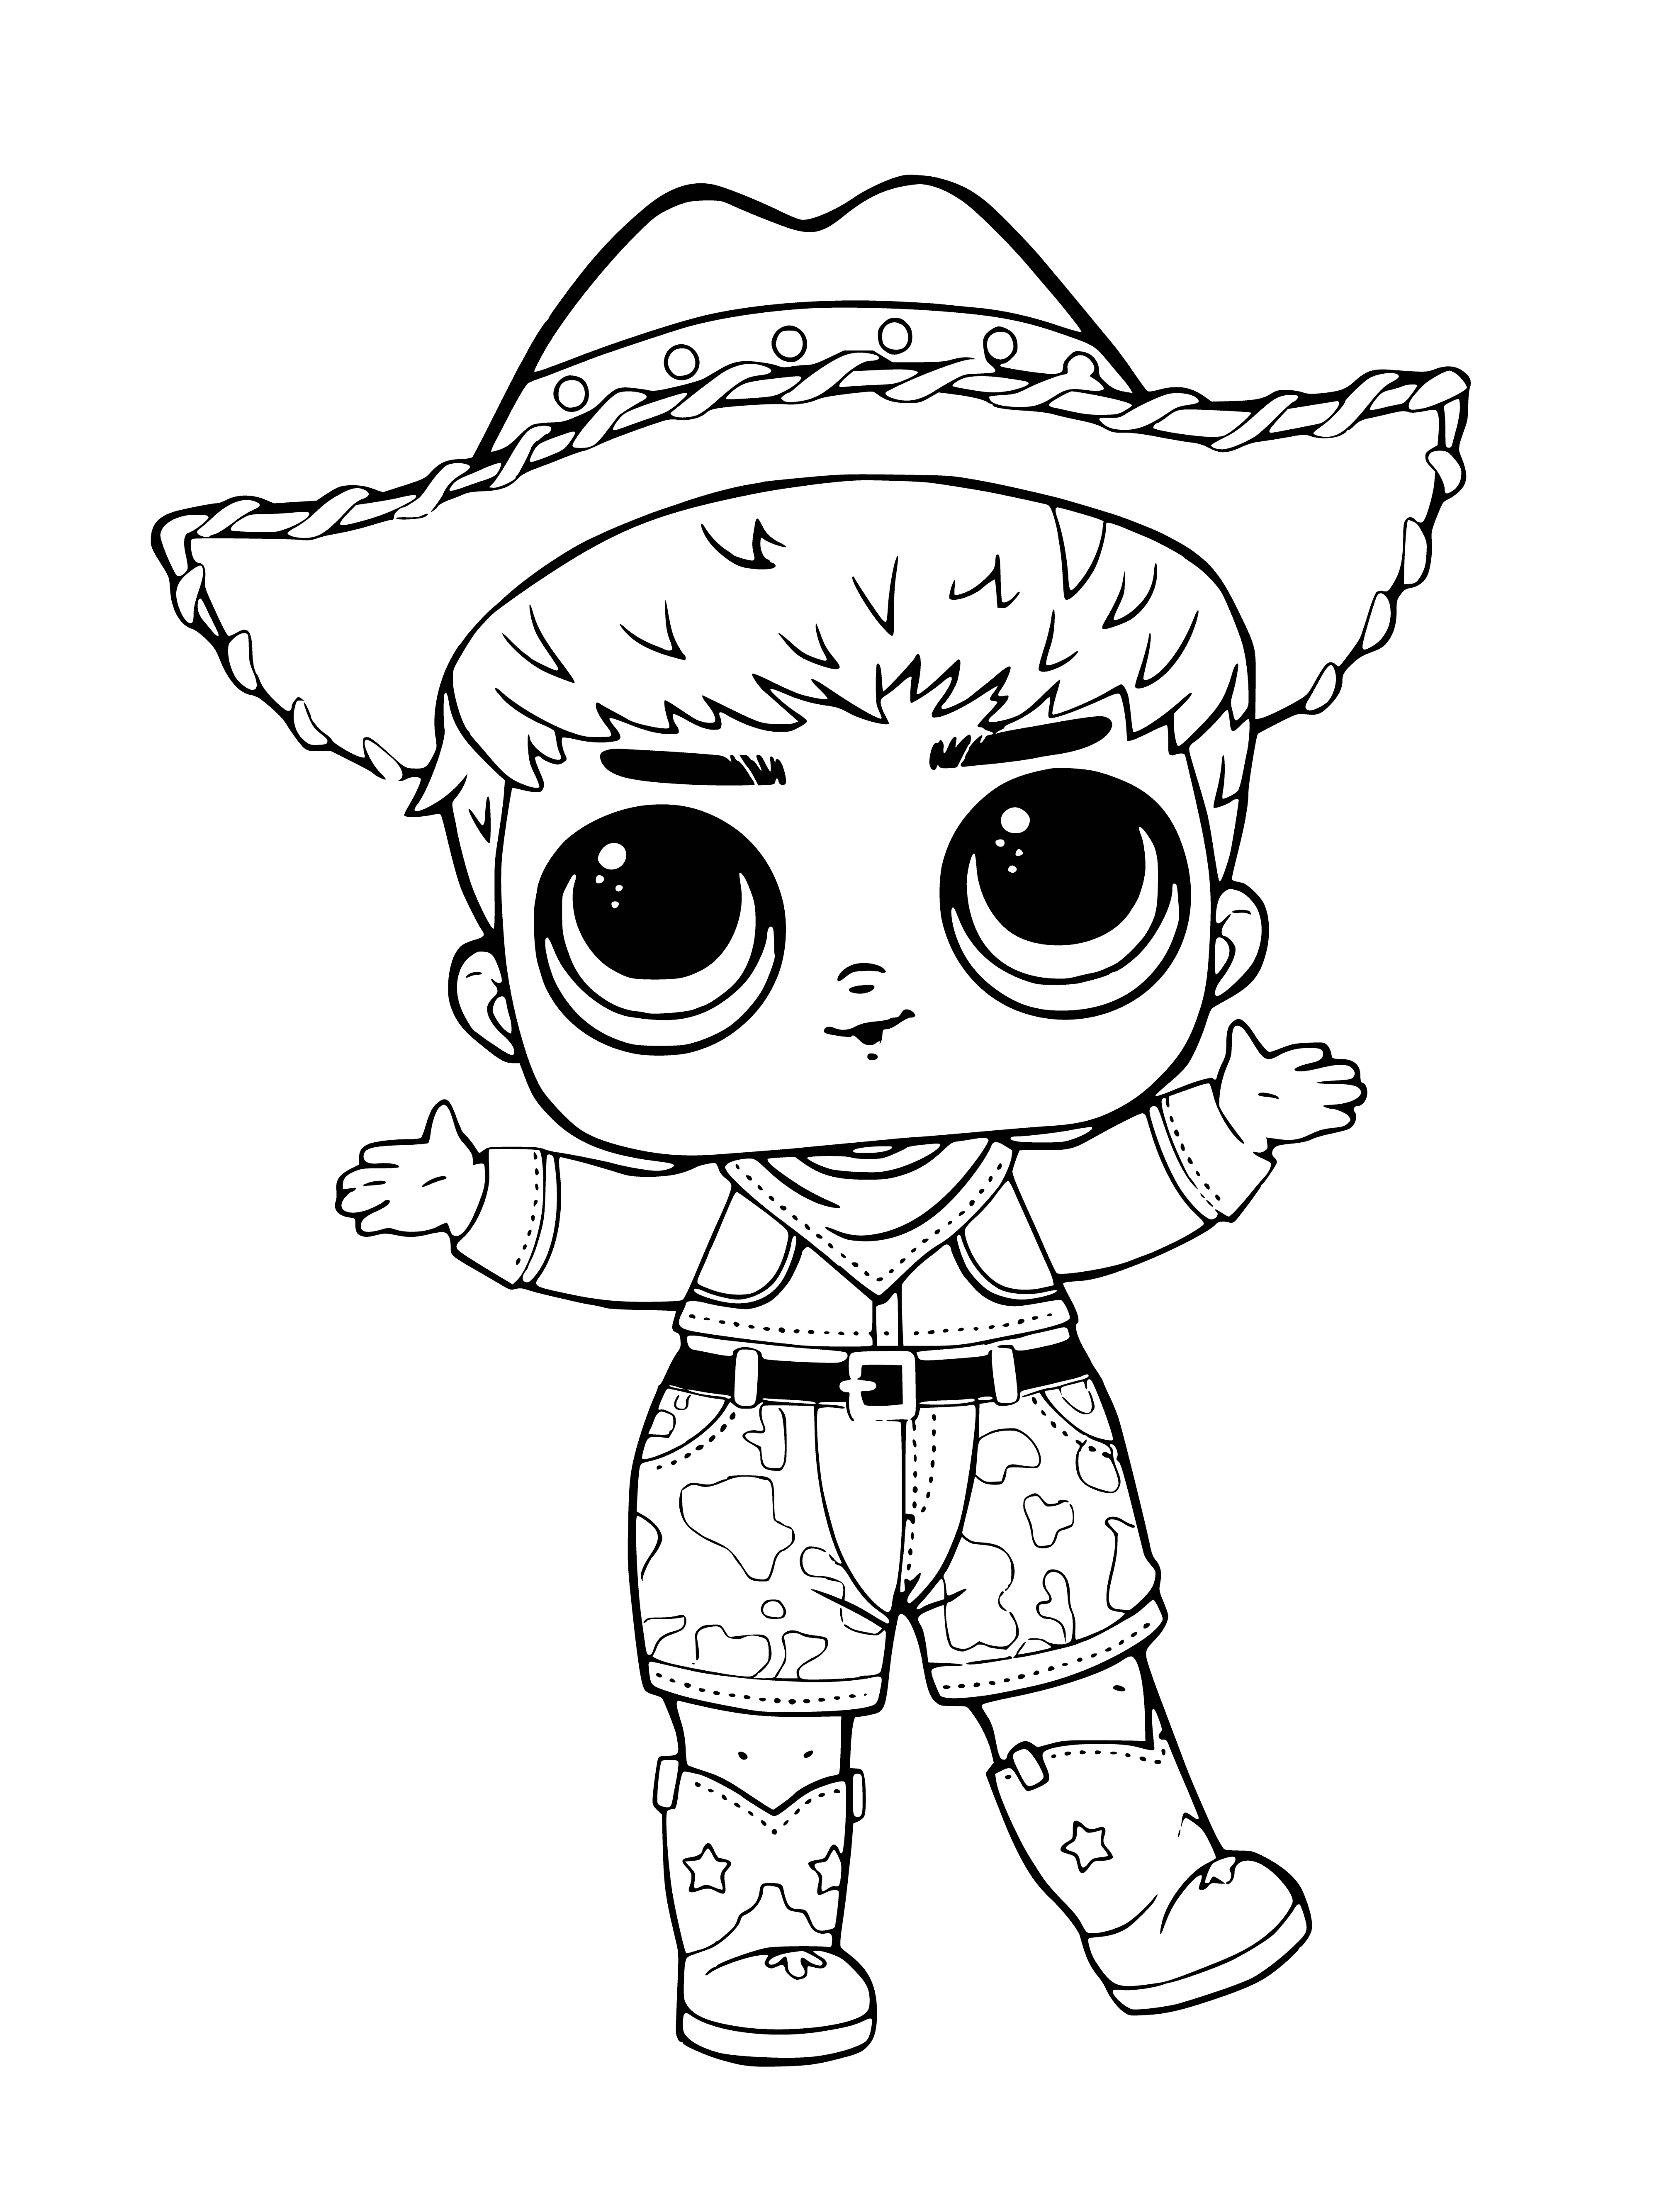 coloring page: Cowboy standin' with feet apart, his arms in the air, mustache, ten-gallon hat, and "LOL DO-SI-DUDE" above him.